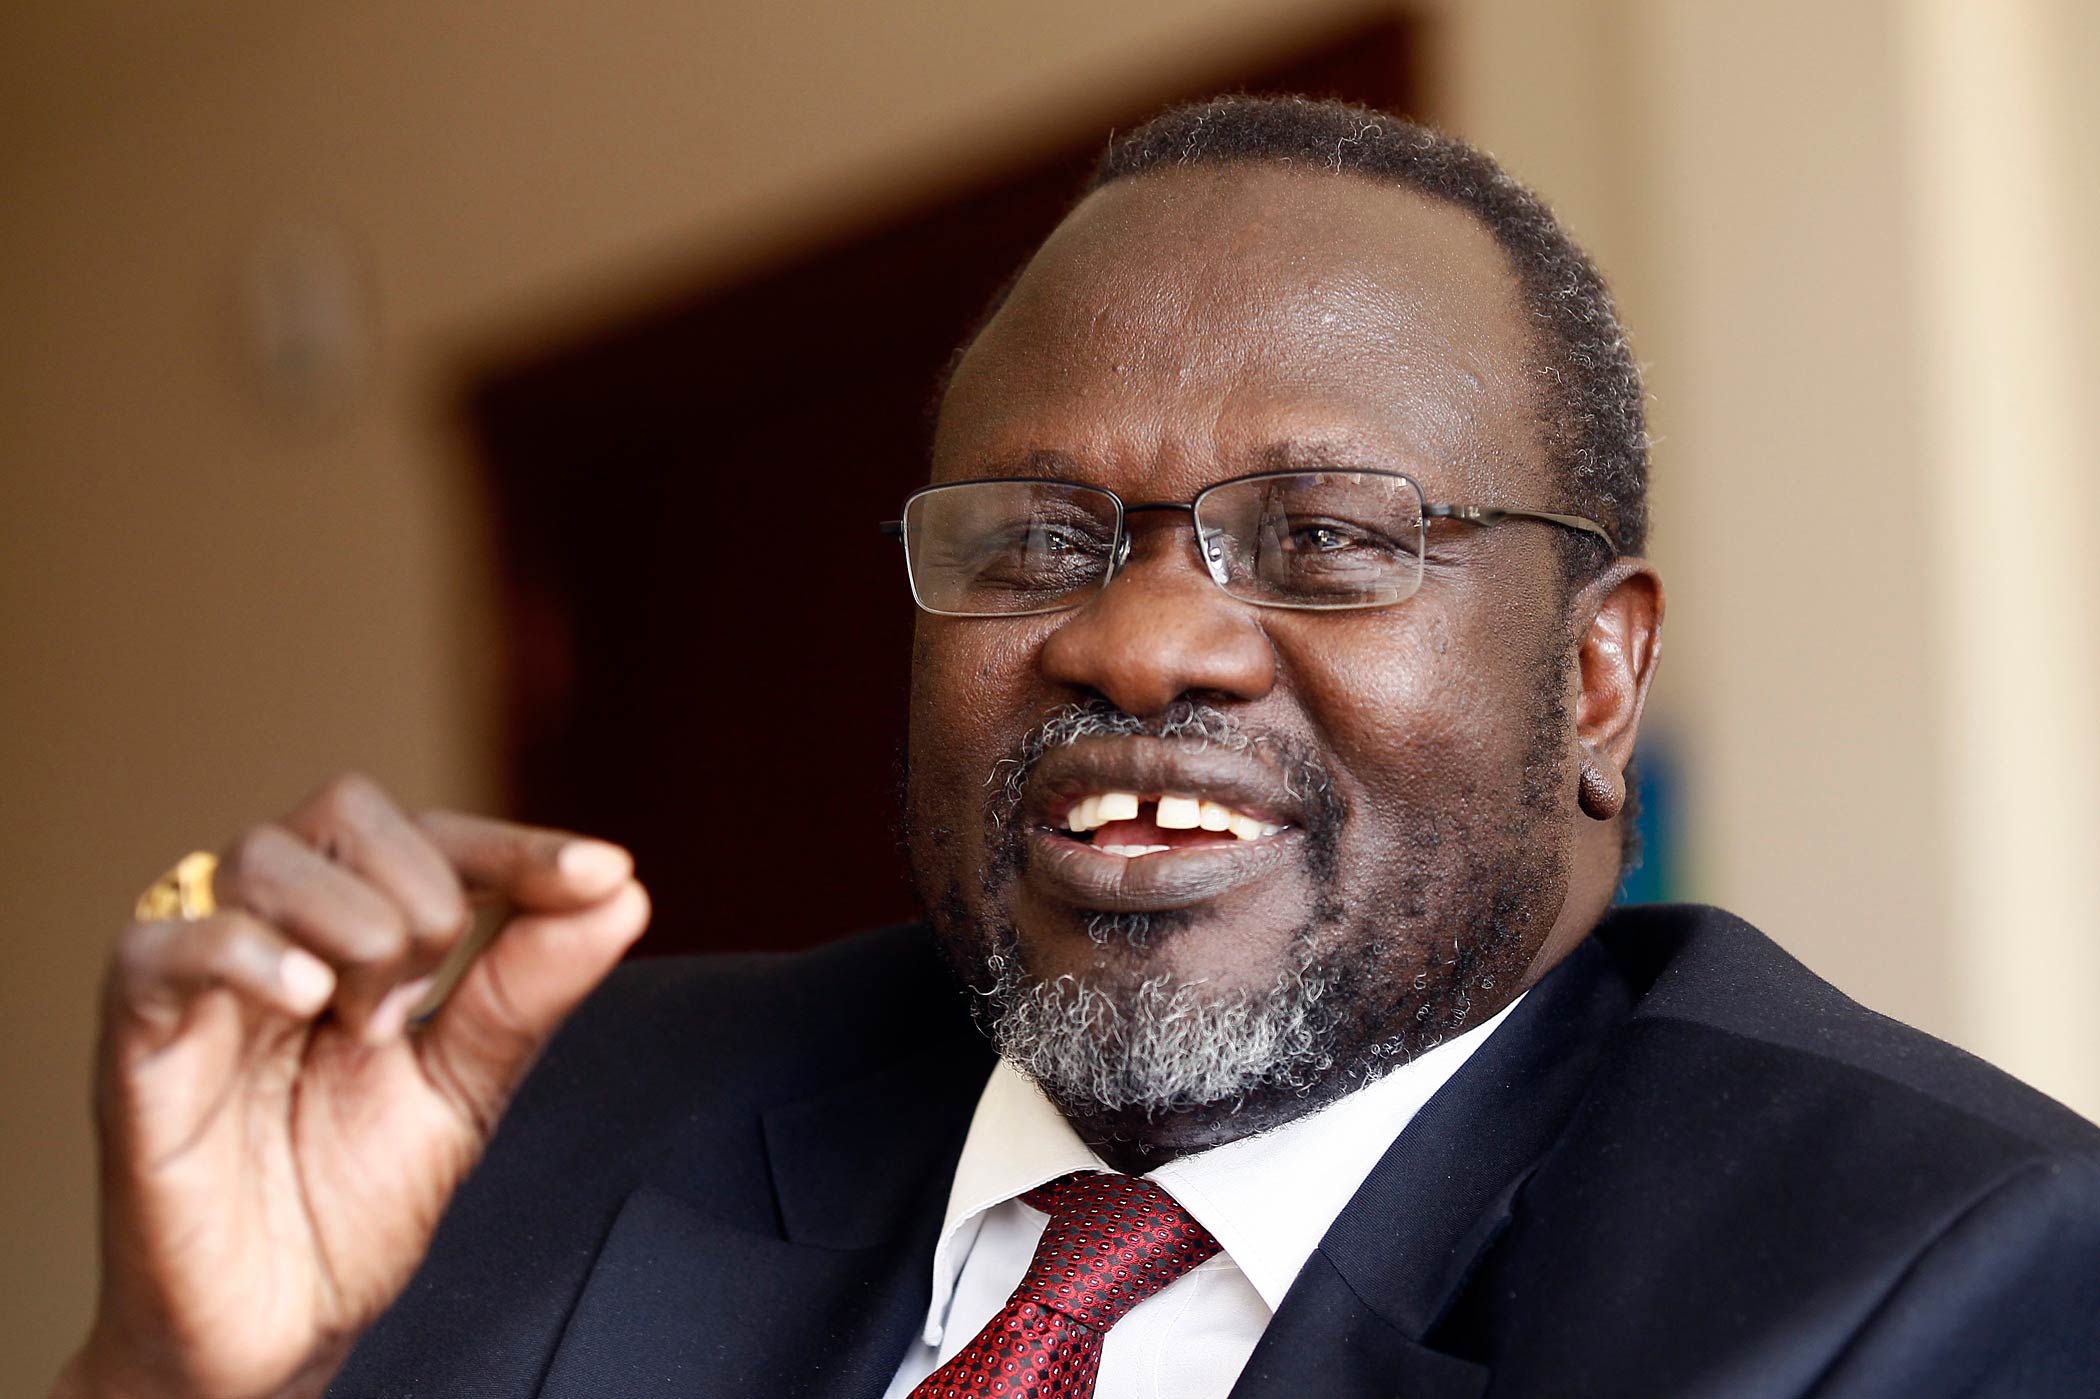 South Sudan's rebel leader Riek Machar speaks during an interview with Reuters in his office in Addis Ababa